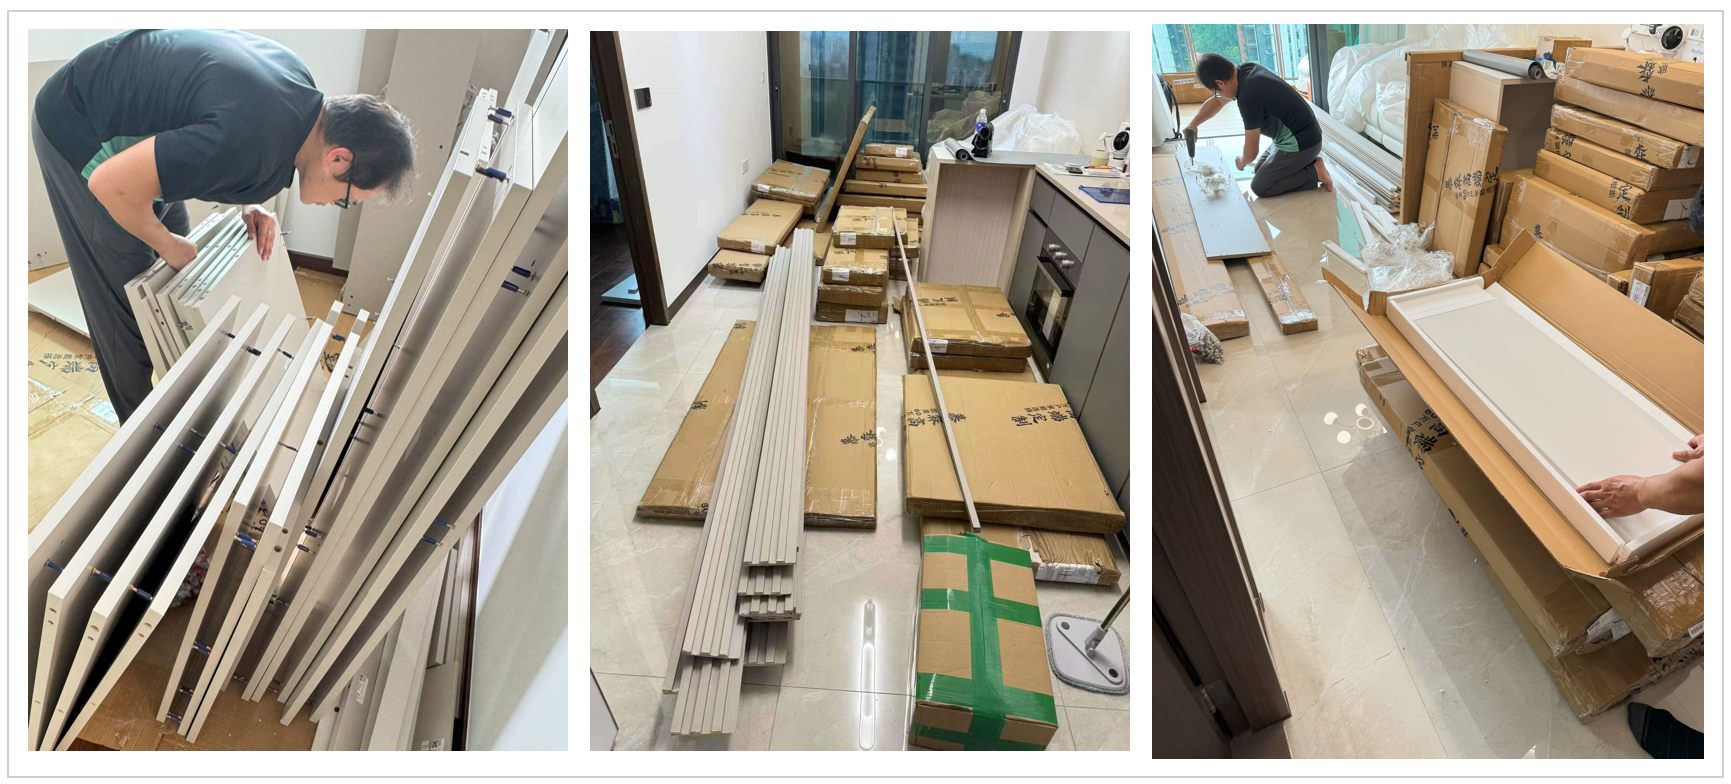 during renovation, assembly of modular cabinet